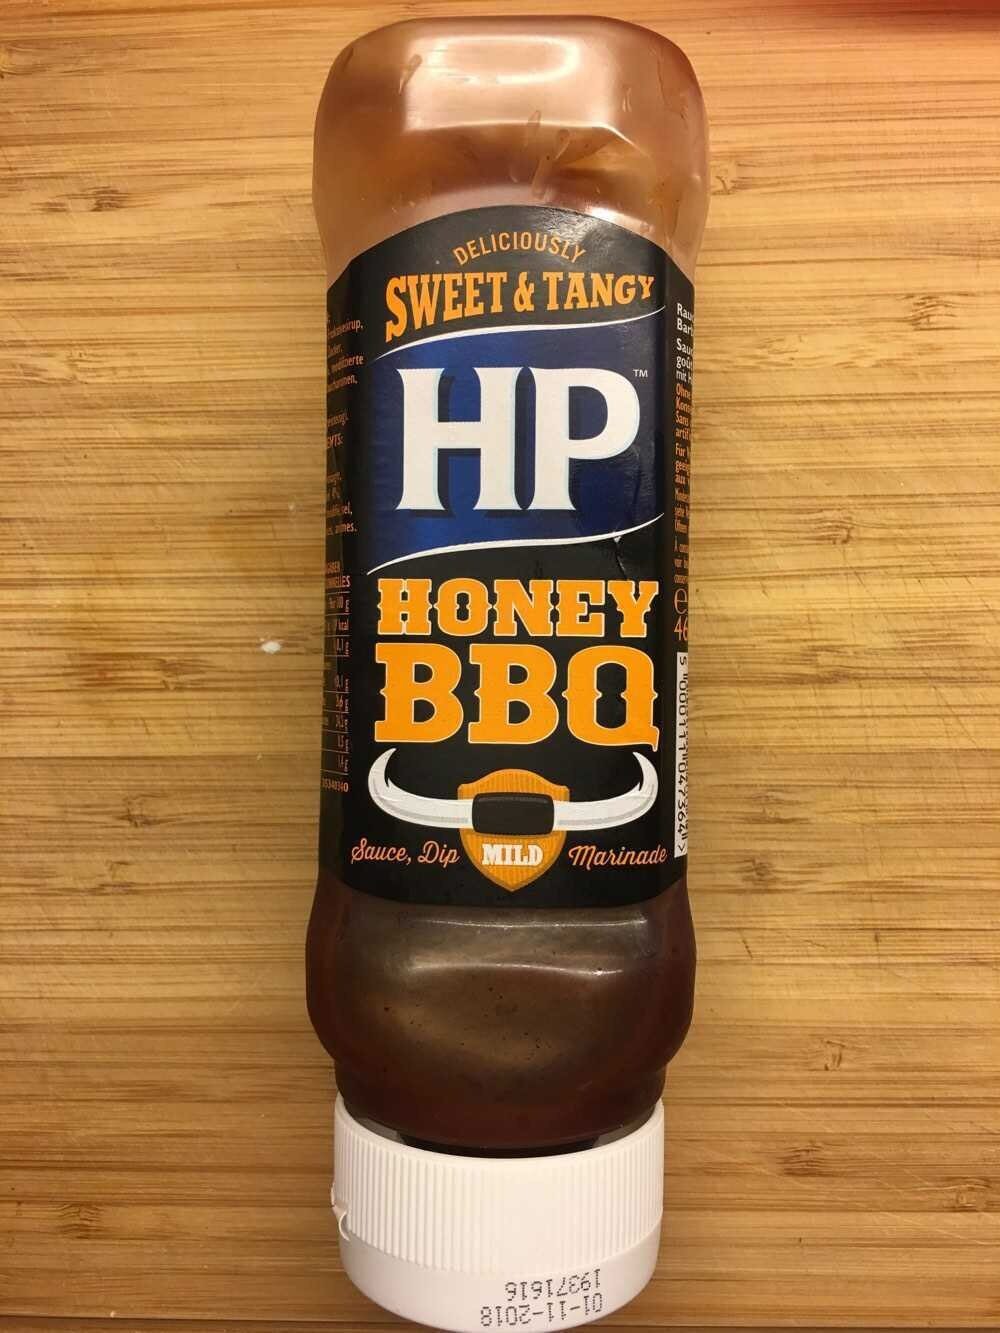 BBQ Soße Deliciously Sweet & Tangy Honey Woodsmoke BBQ Sauce Dip Marinade, mild - Product